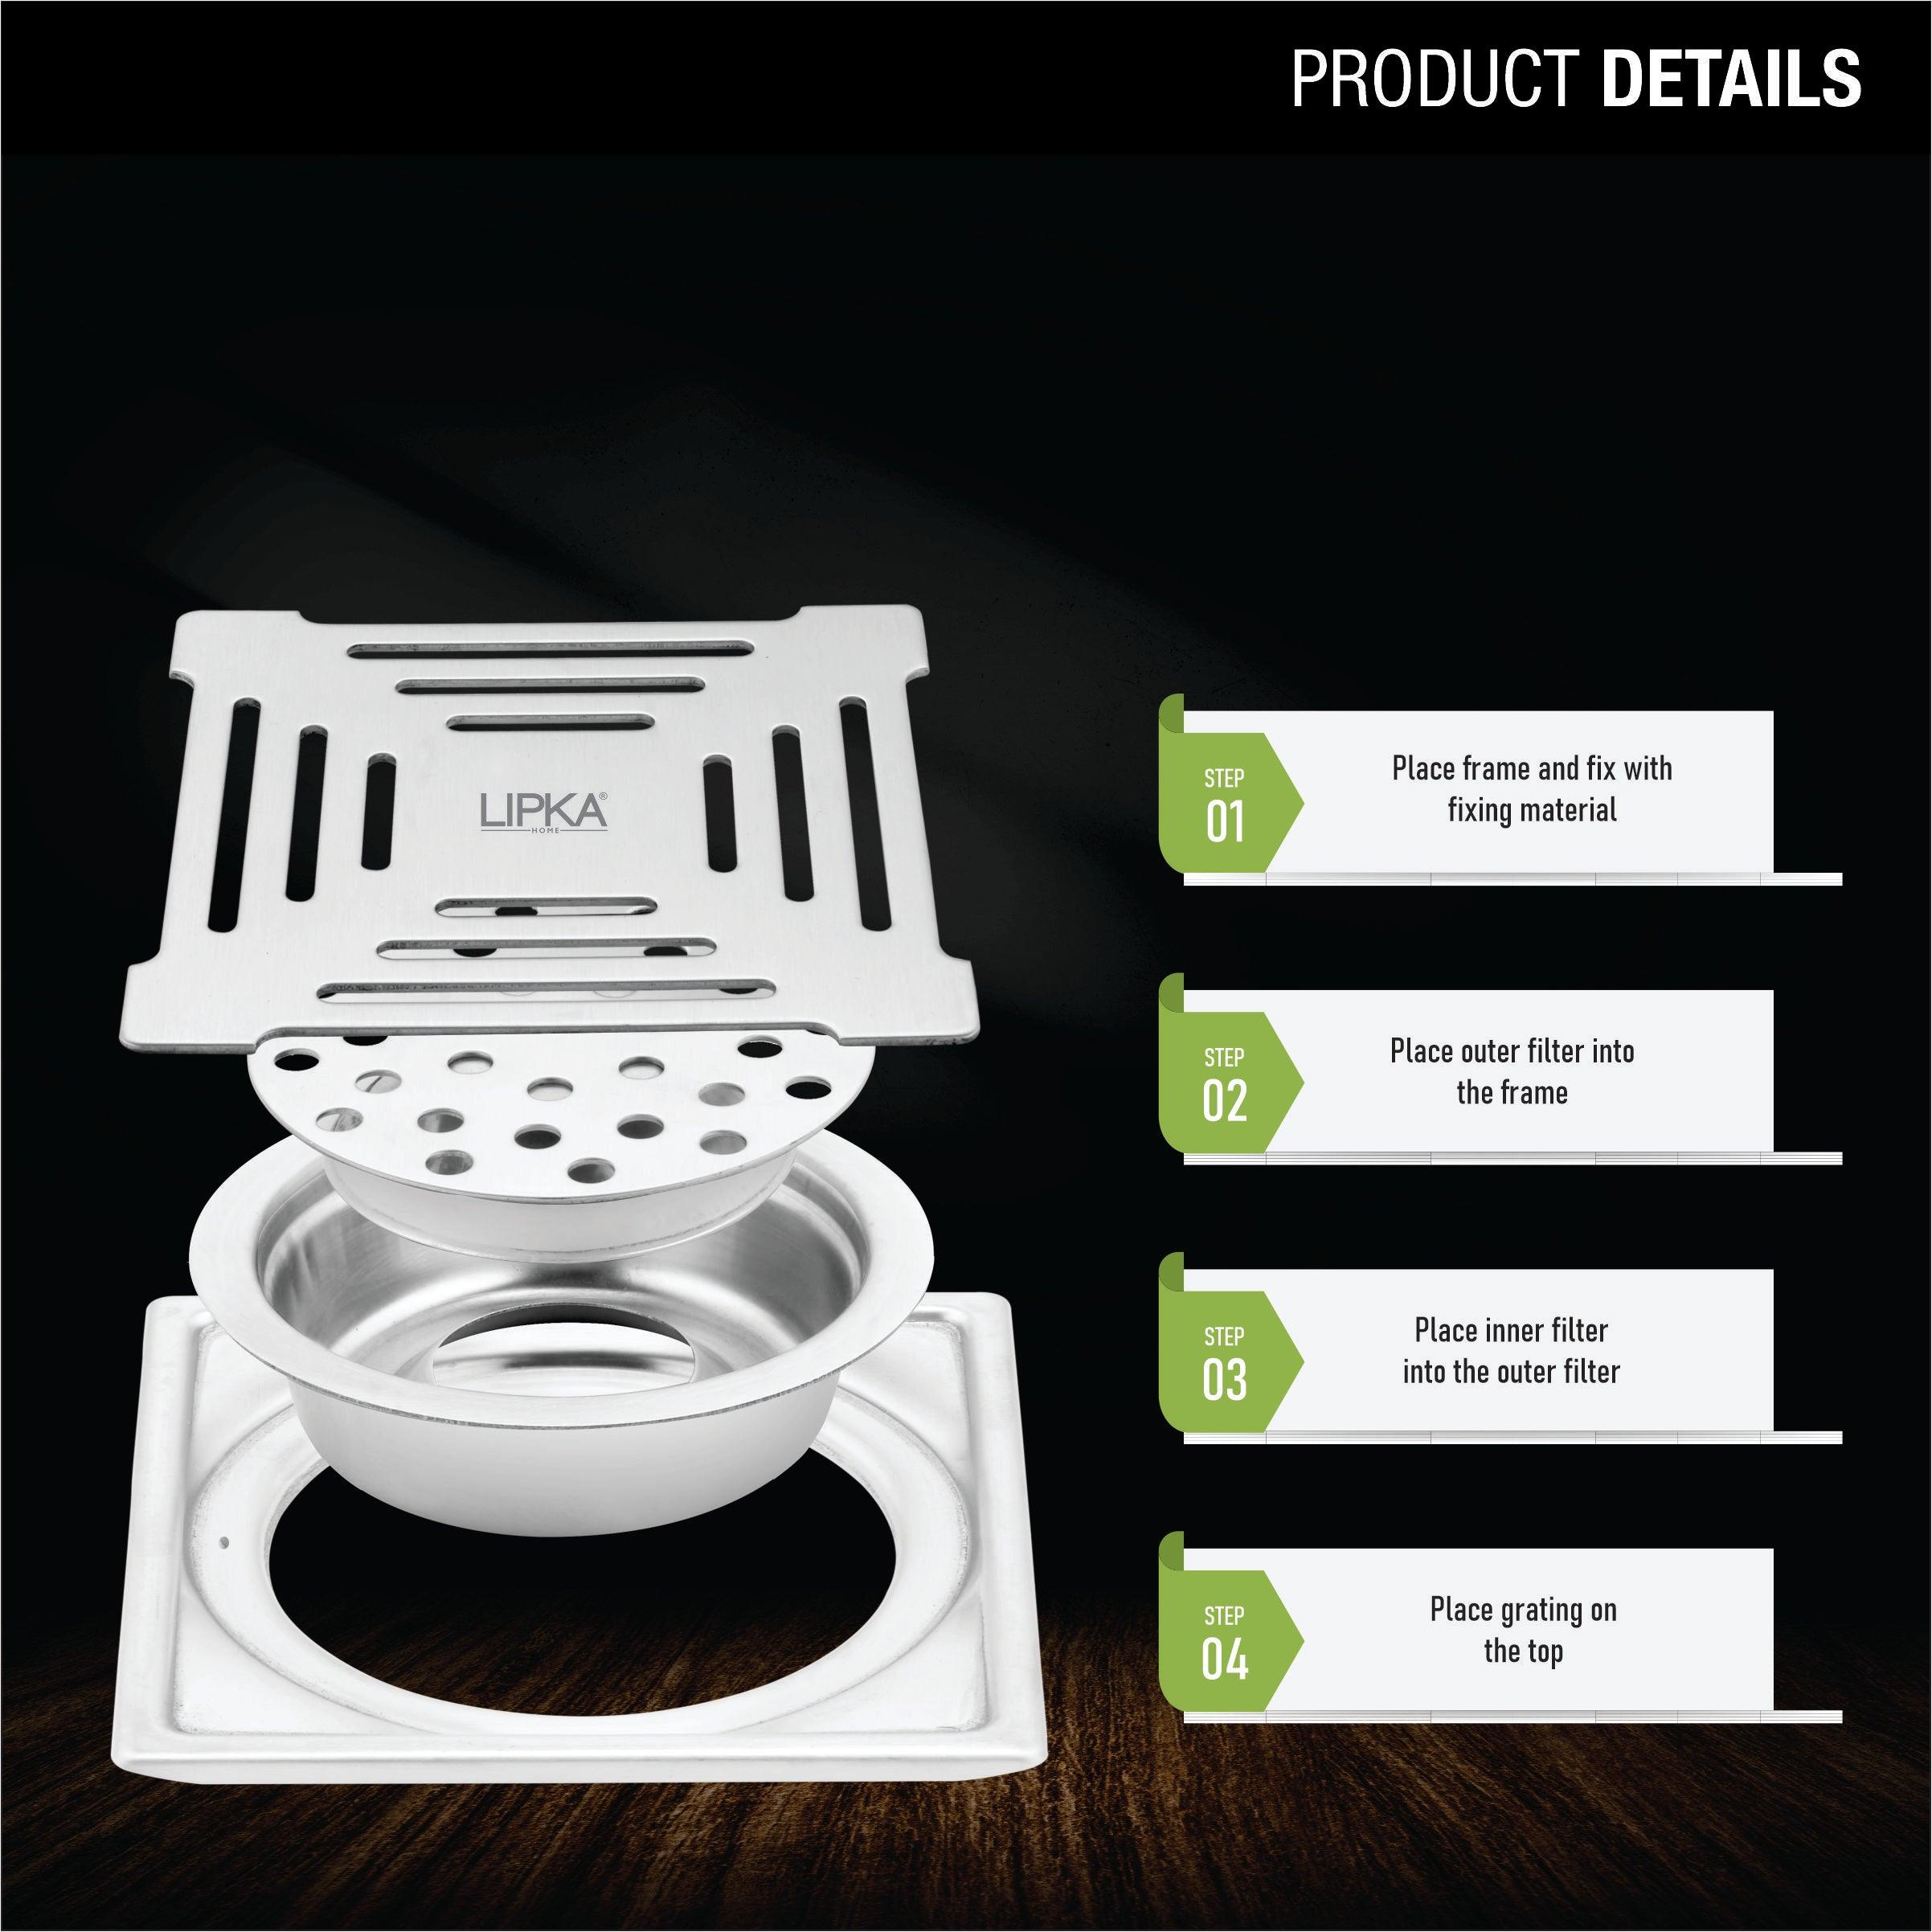 Green Exclusive Square Floor Drain (6 x 6 Inches) with Cockroach Trap product details